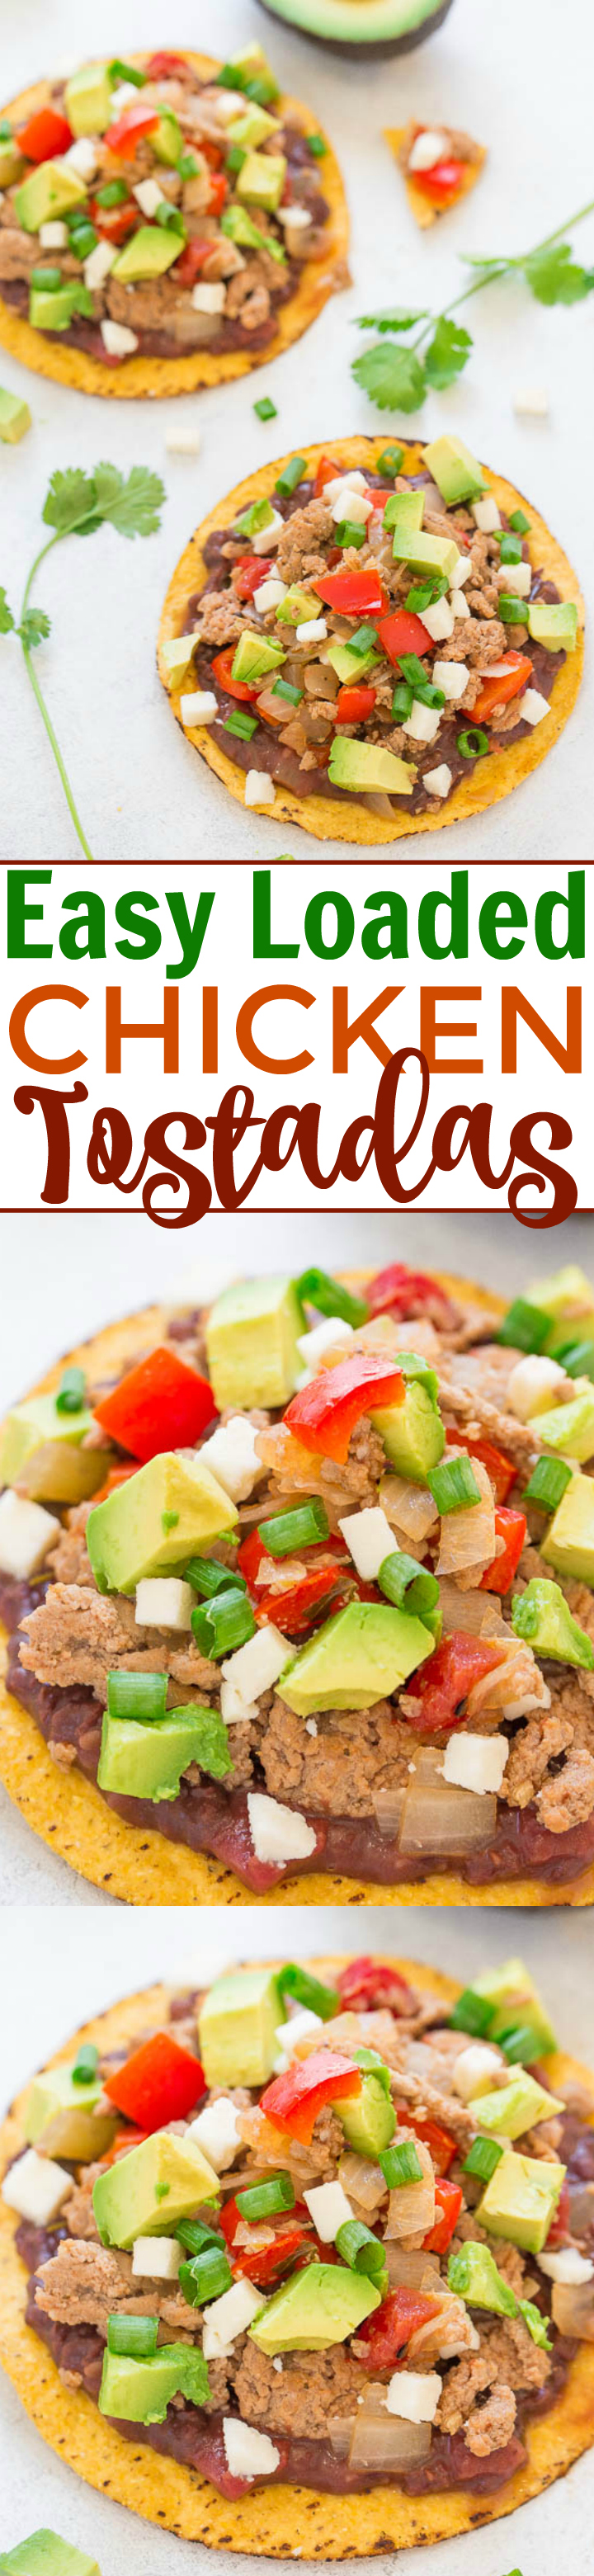 Easy Loaded Chicken Tostadas - Ready in 20 minutes and LOADED to the max!! Chicken, refried beans, peppers, salsa, cheese, and more!! Great party appetizer or EASY weeknight dinner!!